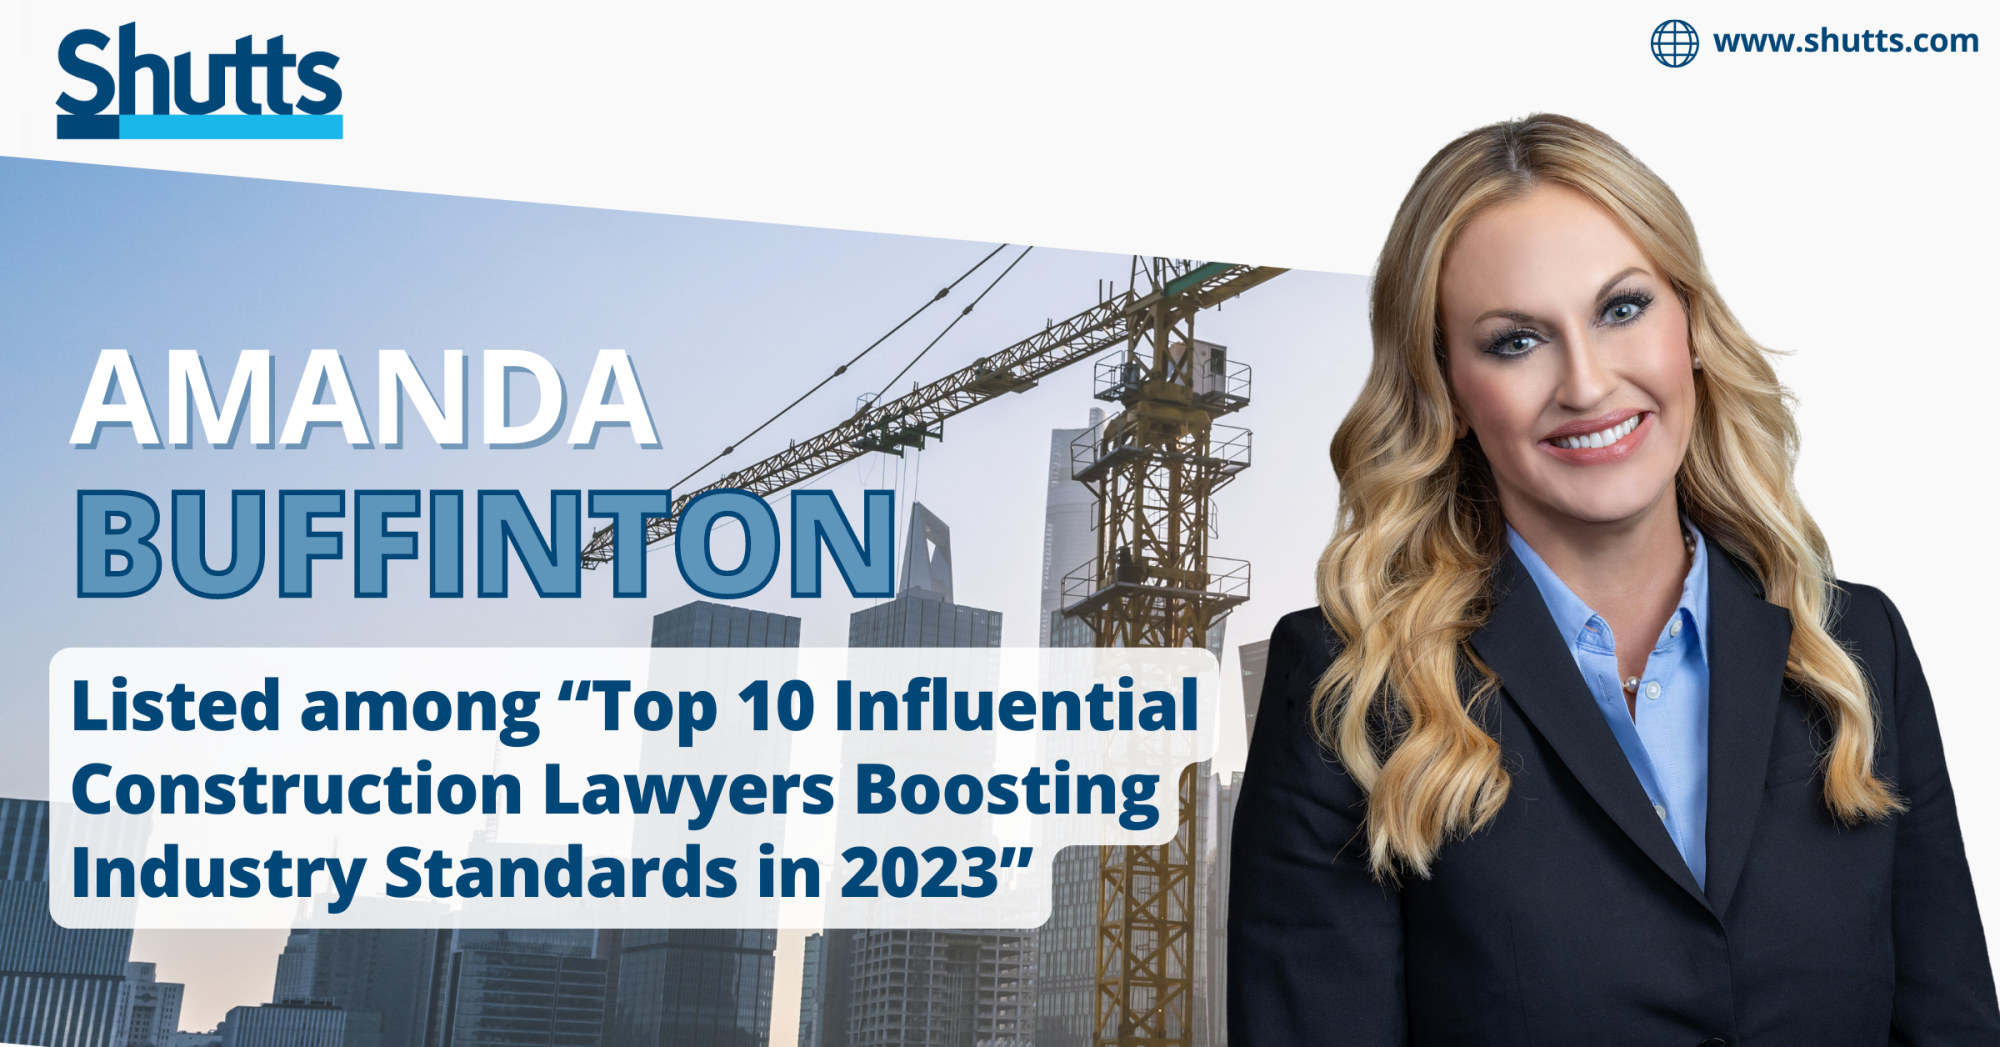 Amanda Buffinton Listed among “Top 10 Influential Construction Lawyers Boosting Industry Standards in 2023”